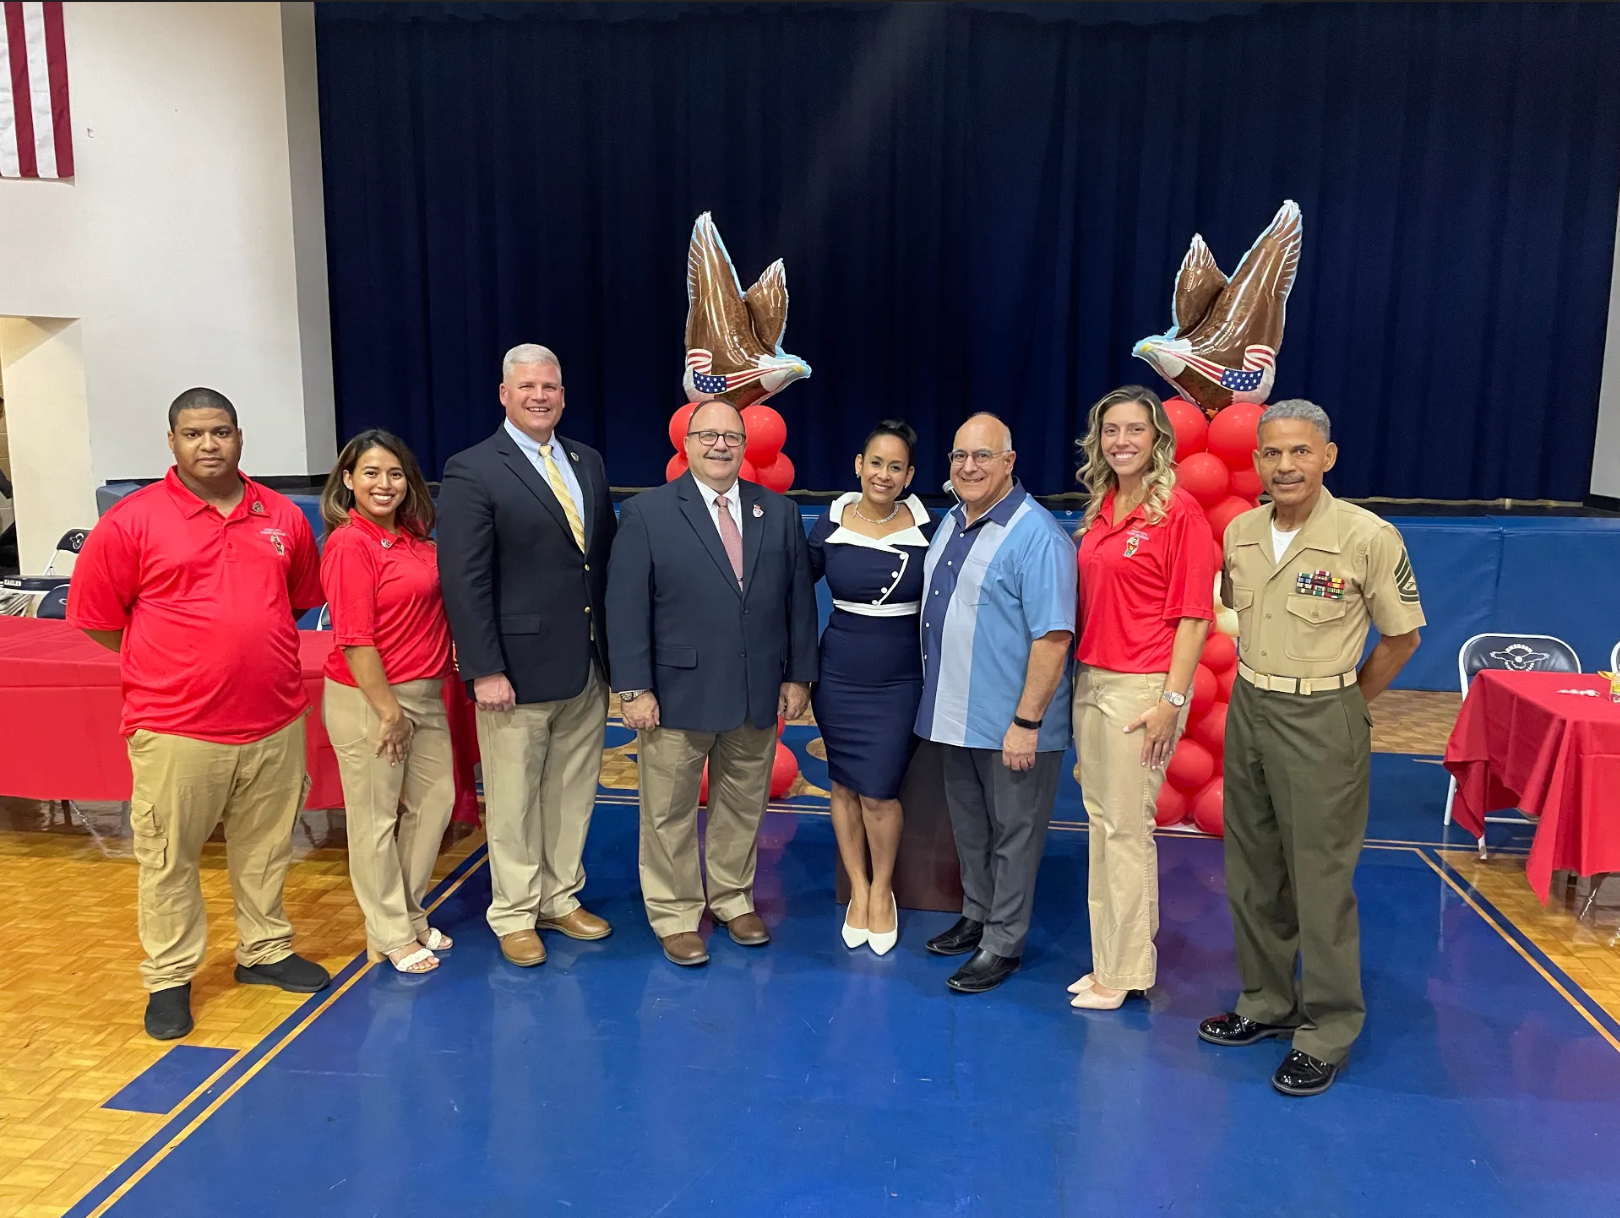 The Union City School District Administration celebrating during the Young Marines Graduation